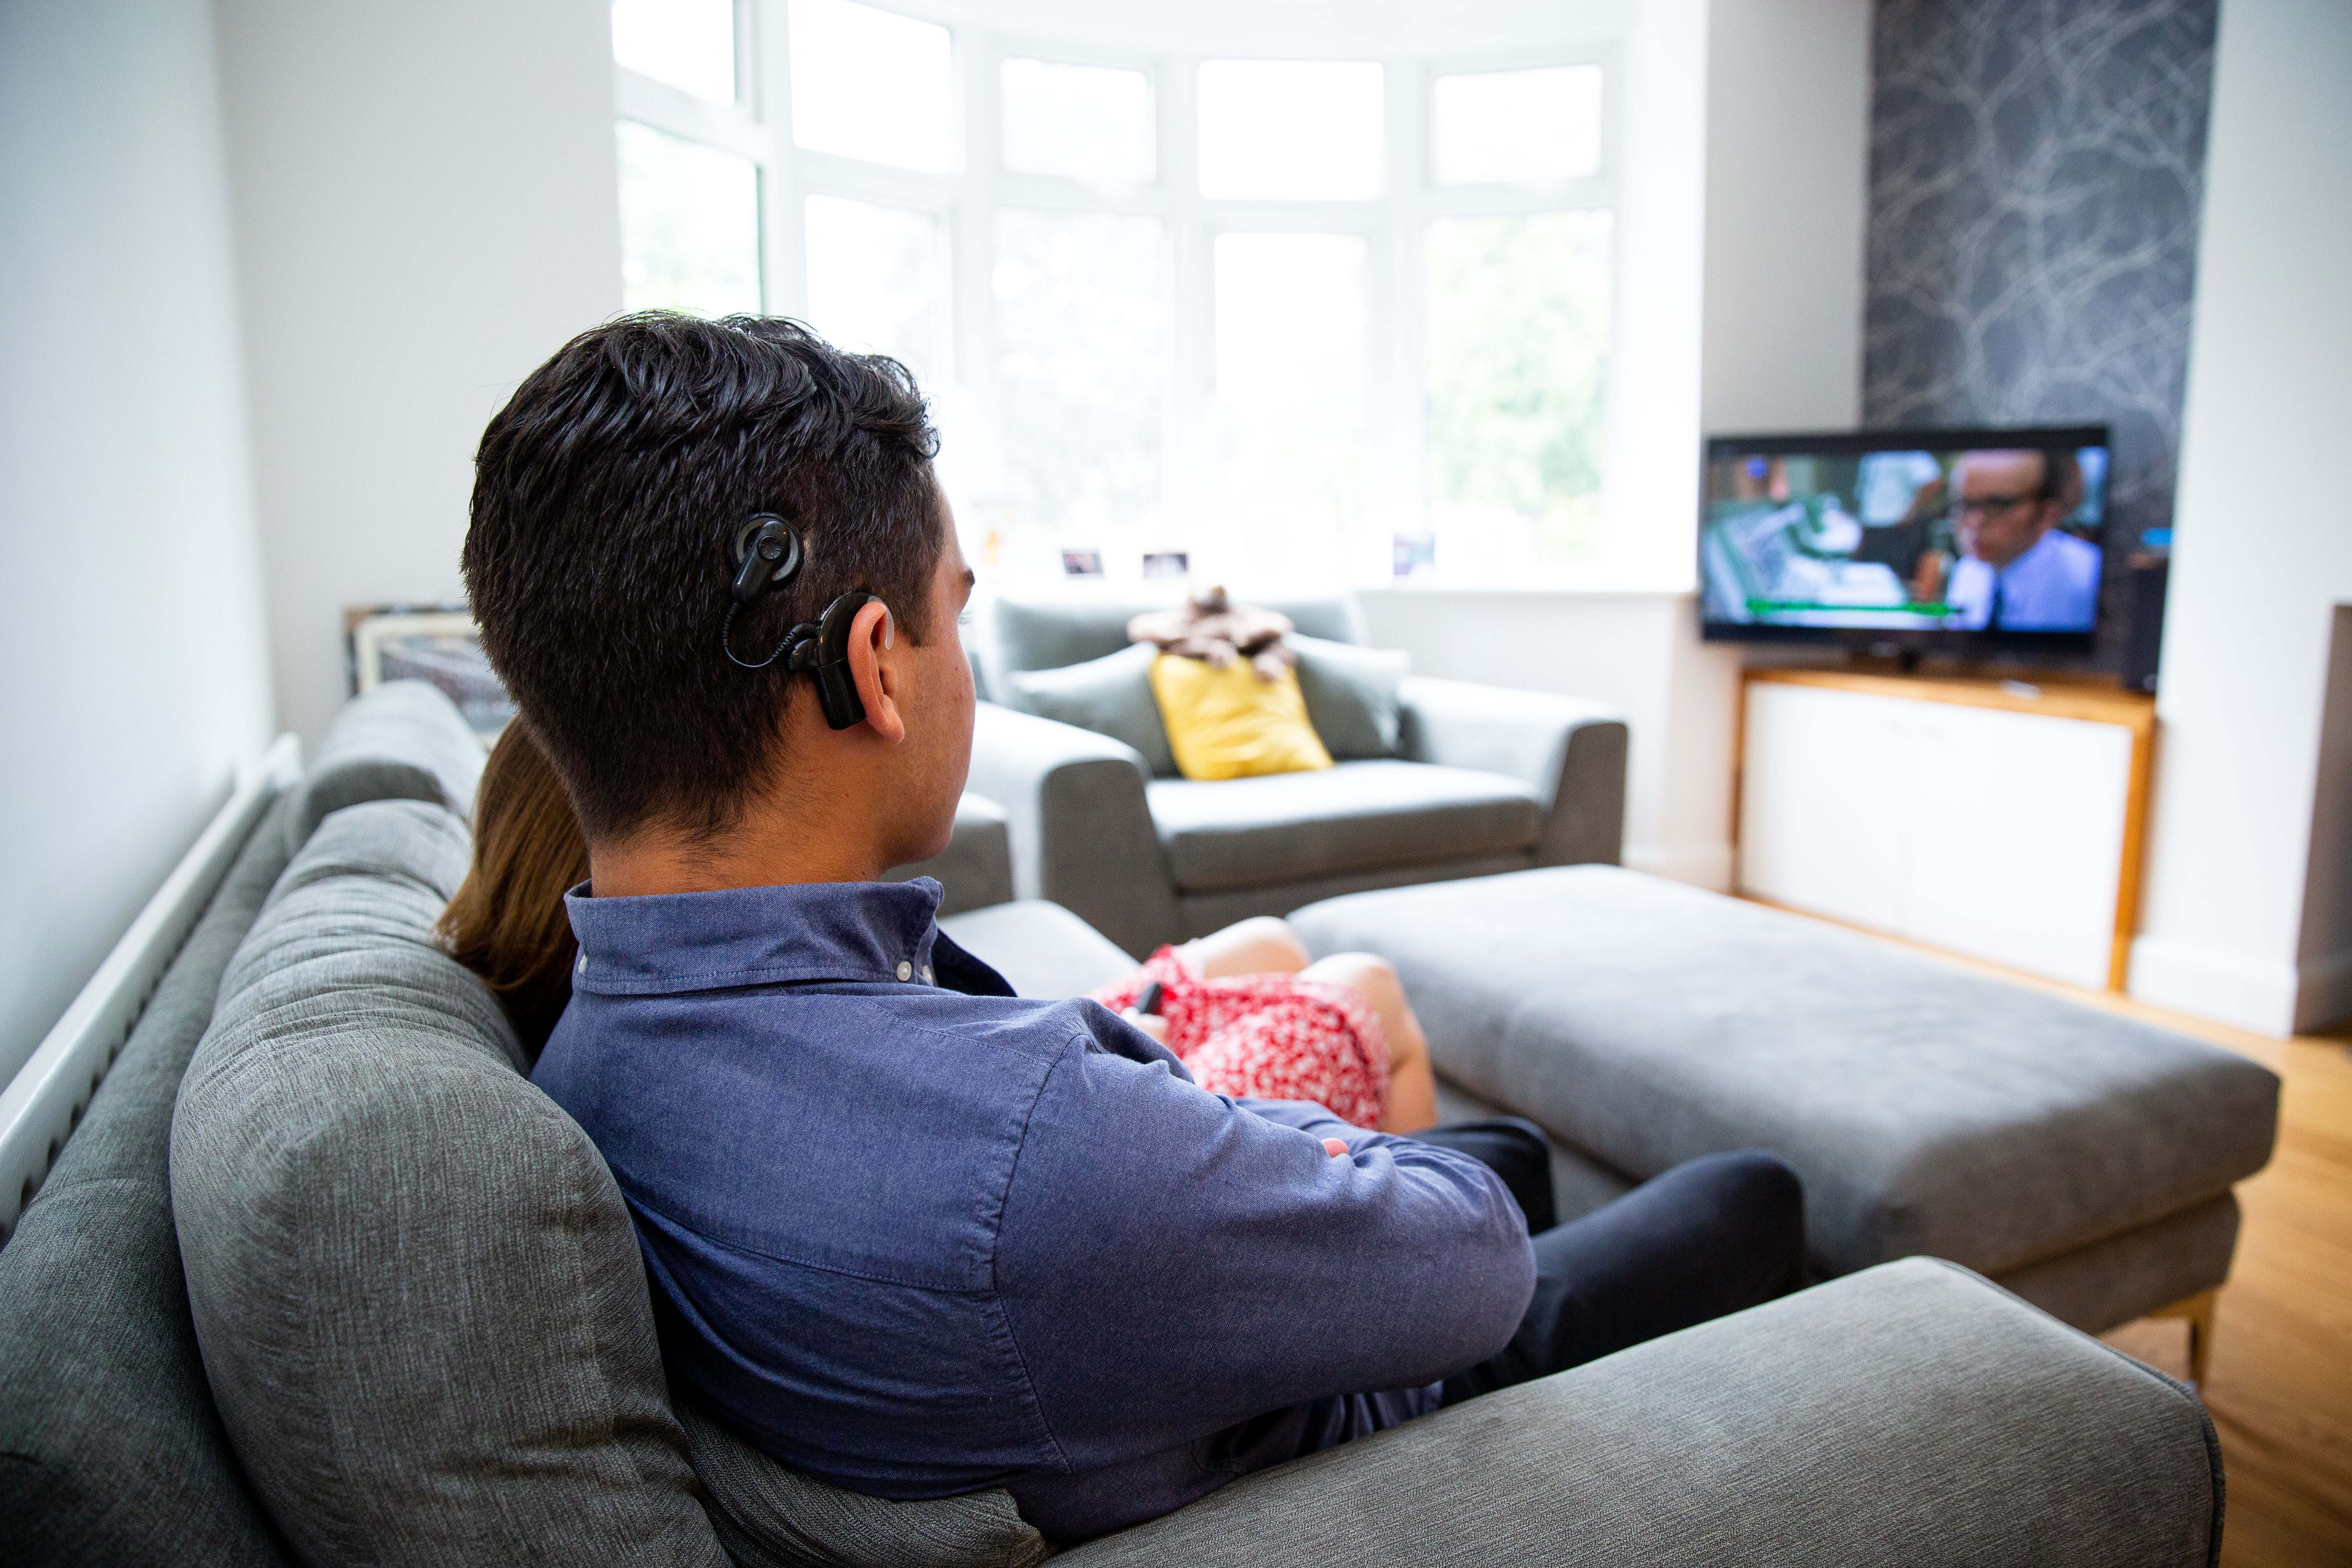 Photo taken over the shoulder over a young man wearing a blue shirt and a cochlear implant. He sits on the sofa beside a woman wearing a red skirt, watching TV with subtitles on.